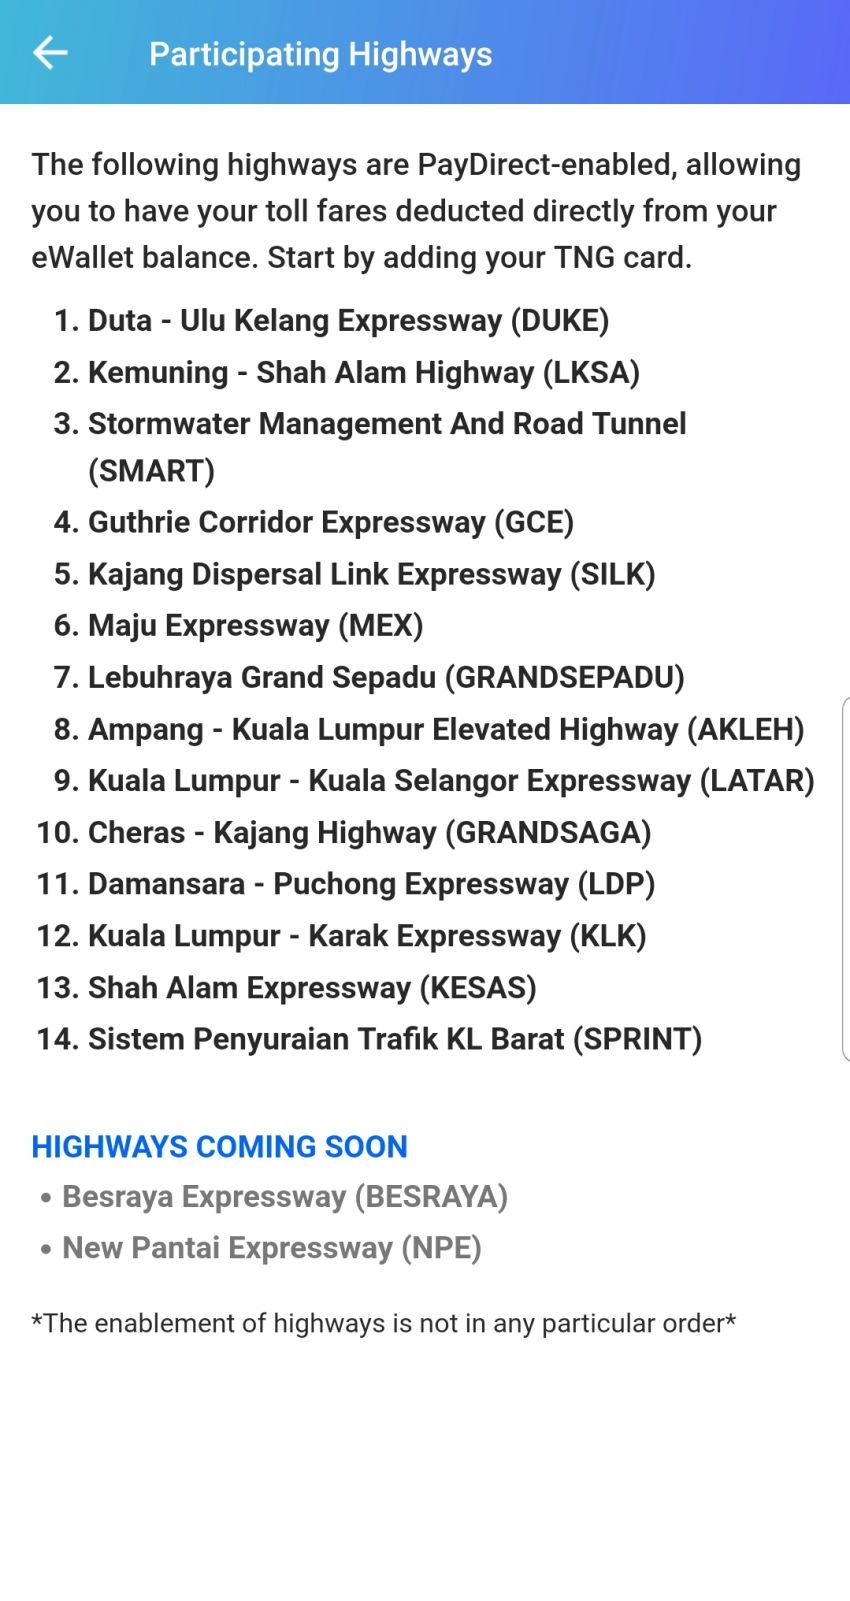 Touch ‘n Go PayDirect now available on four more highways in Malaysia – LDP, KLK, KESAS, SPRINT 957113